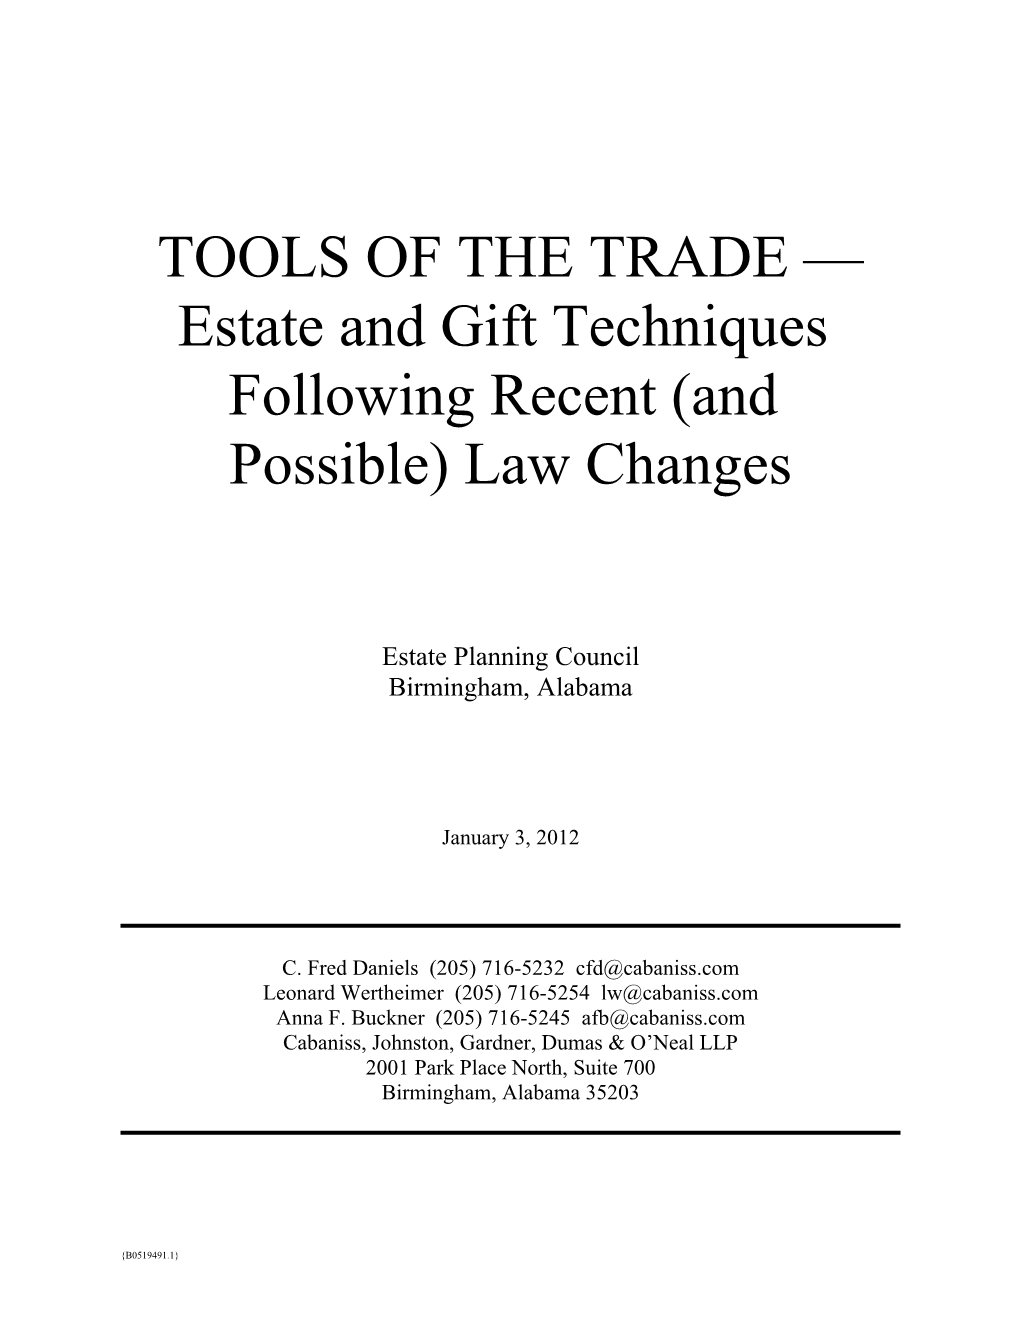 Tools Of The Trade - Estate Planning Council (B0519491.DOC;1)